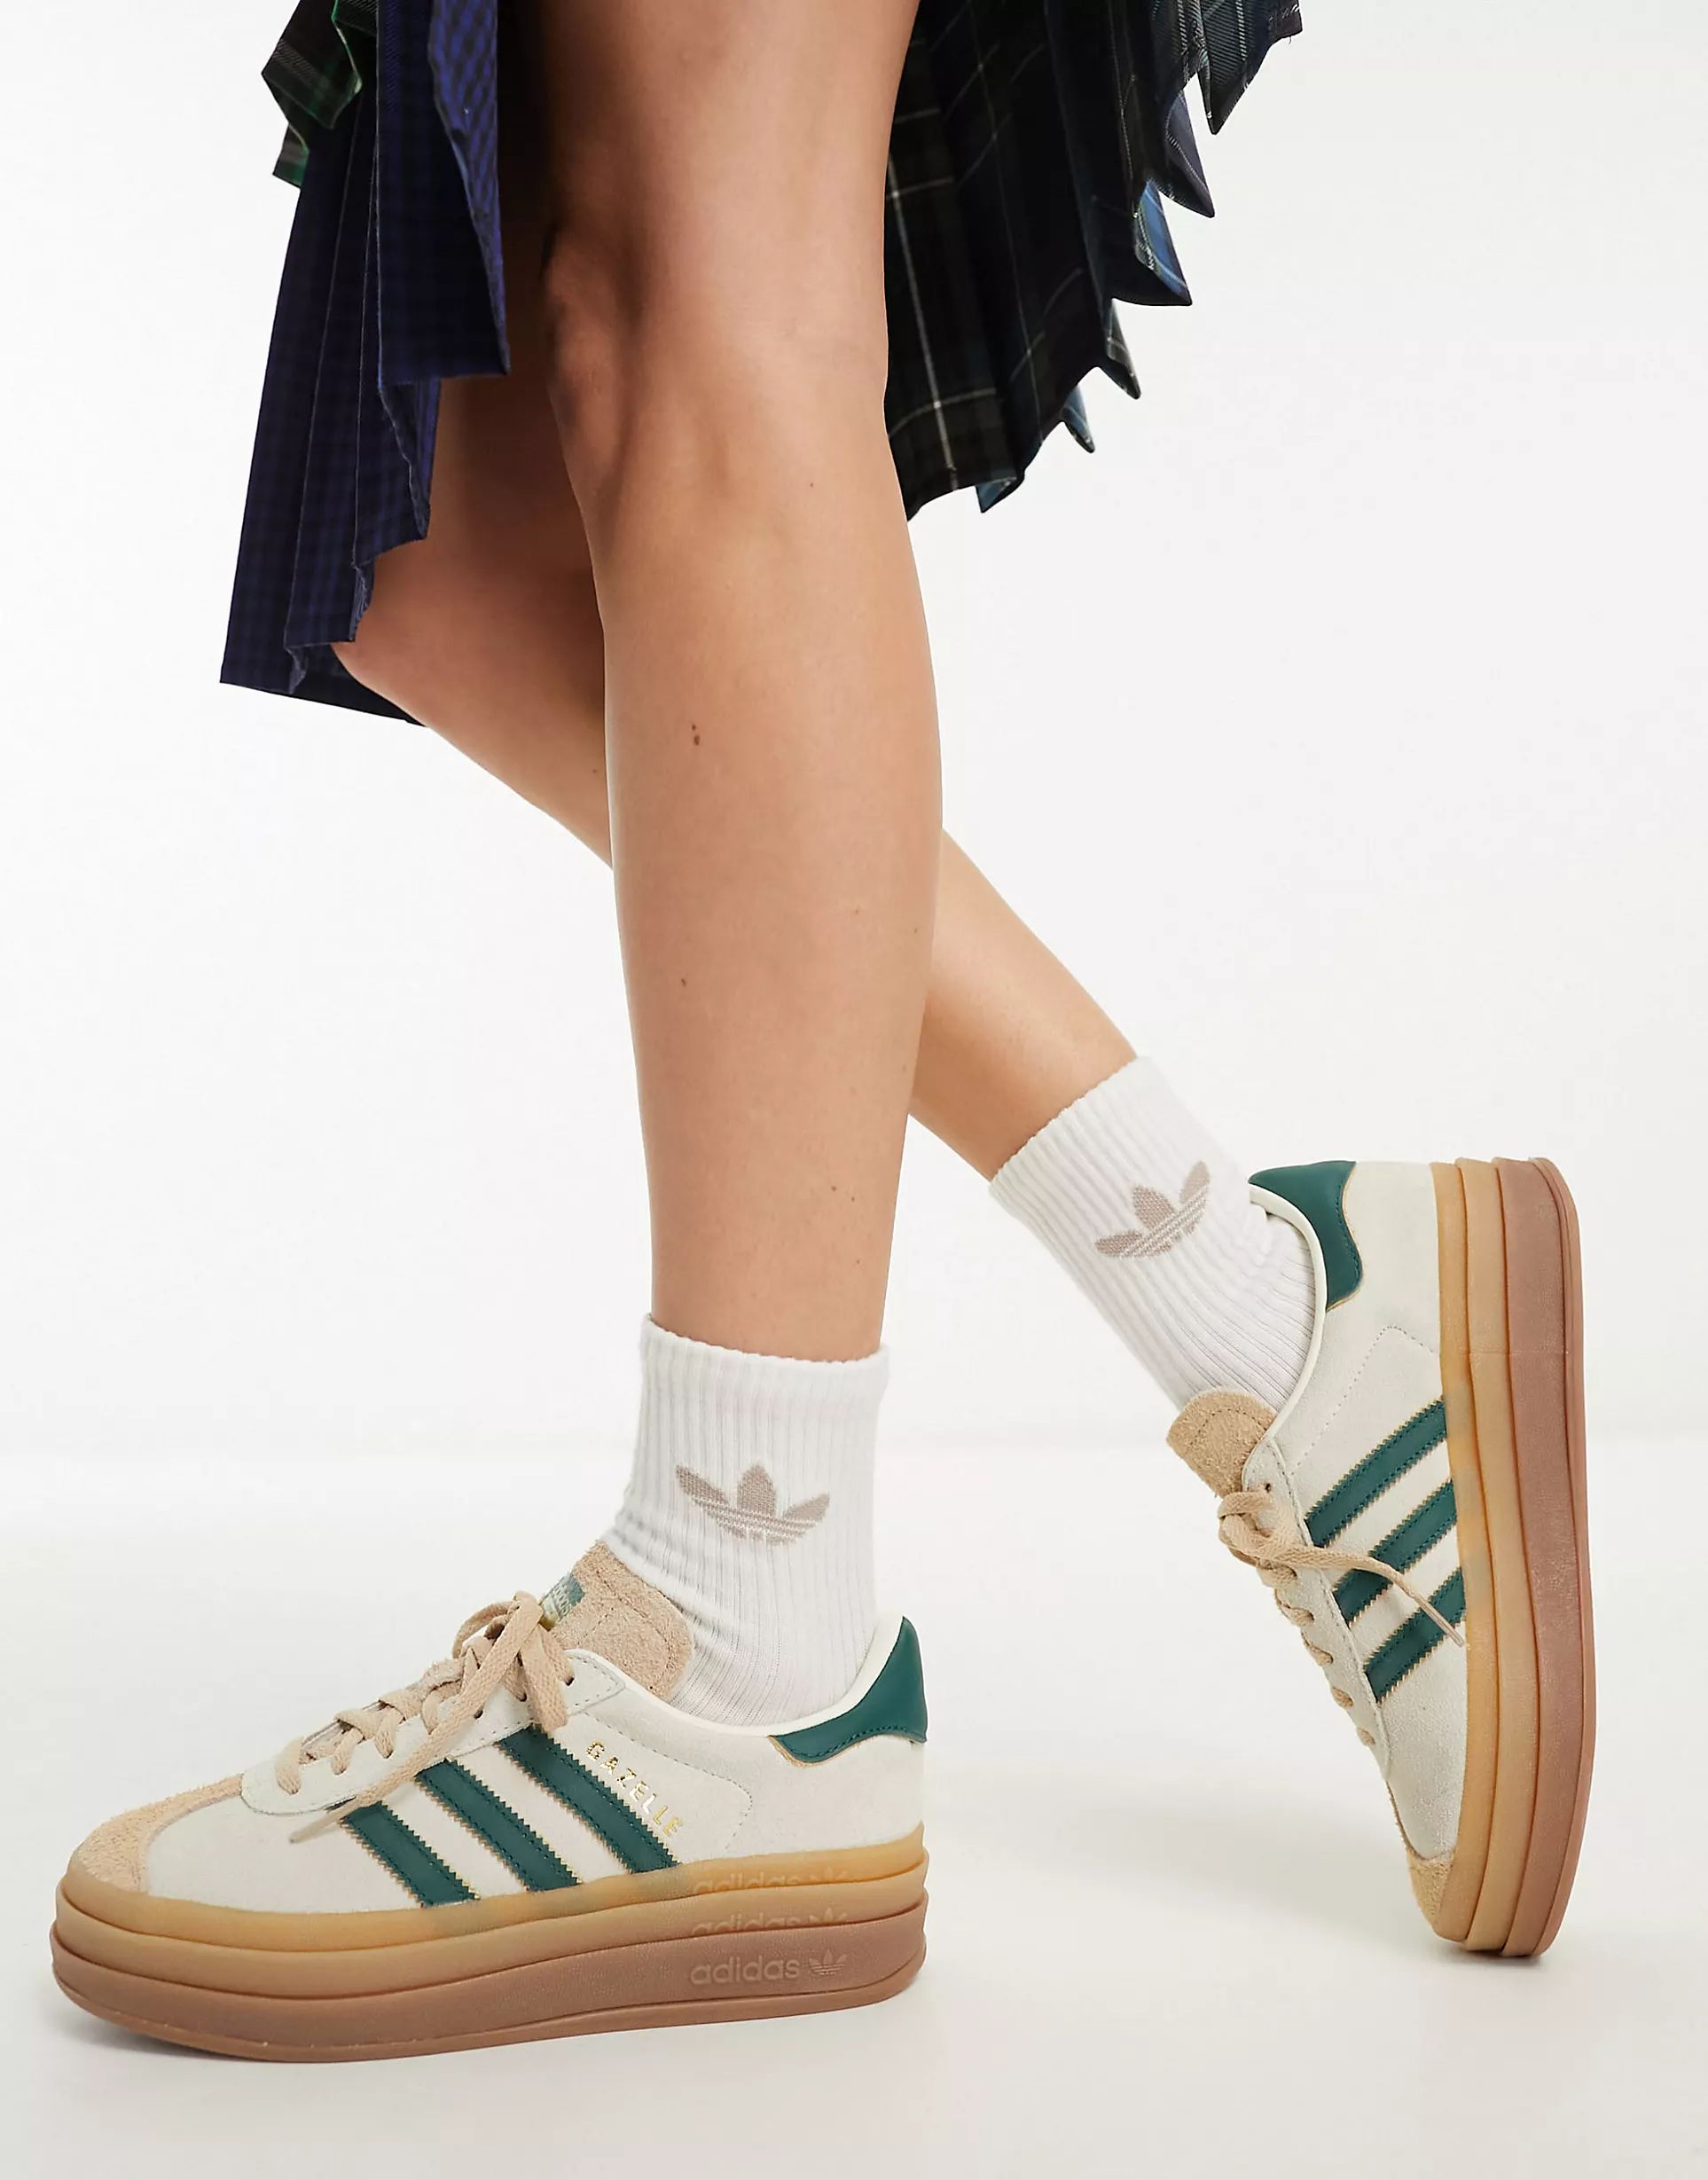 adidas Originals Gazelle Bold sneakers in white and green | ASOS (Global)